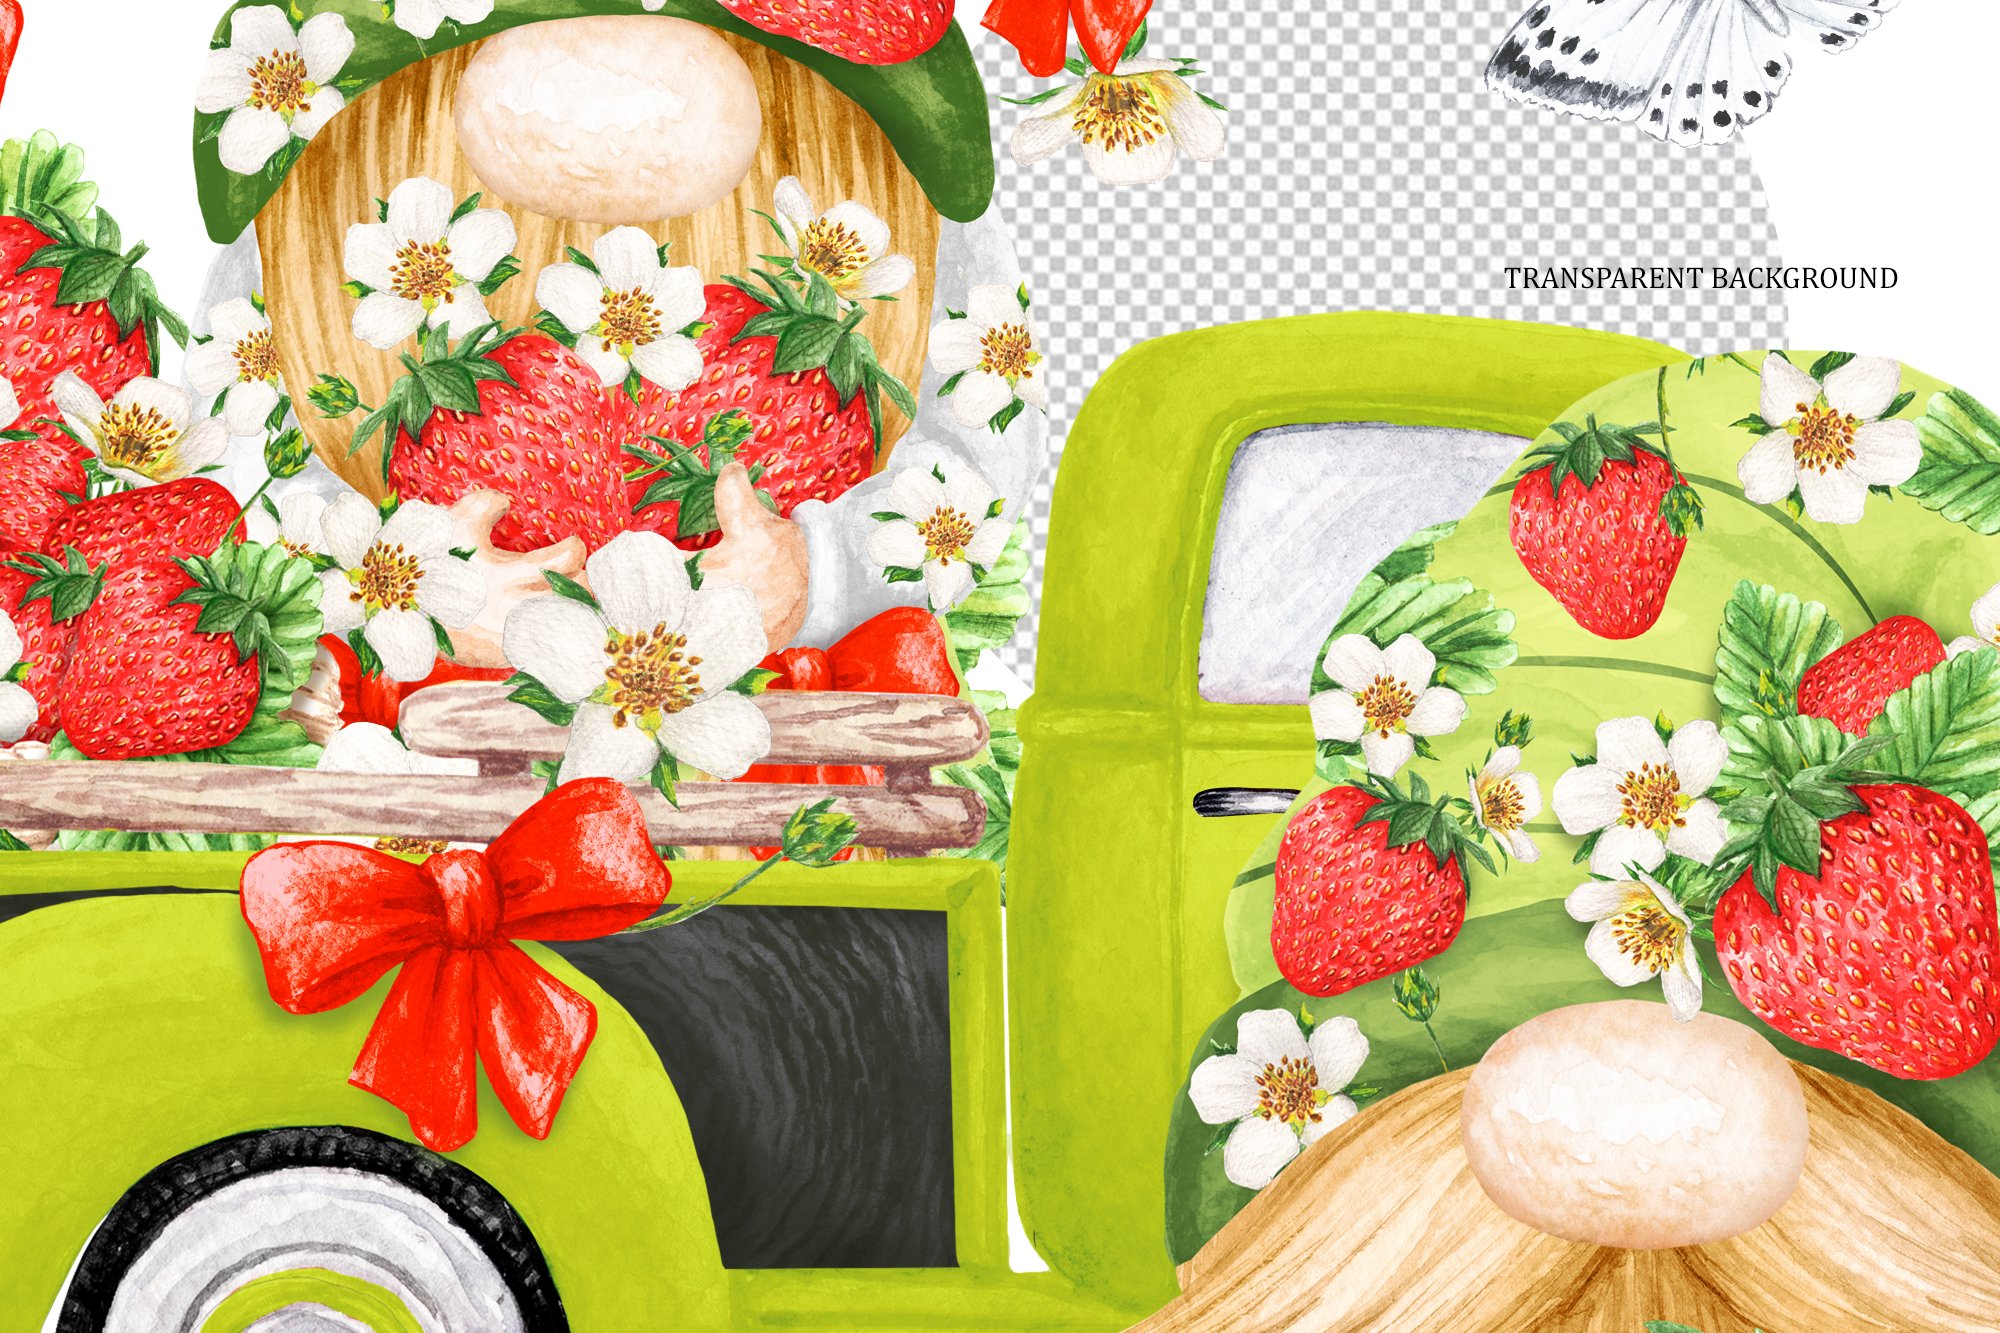 Watercolor clipart in close-up of a gnome in a truck with strawberries.